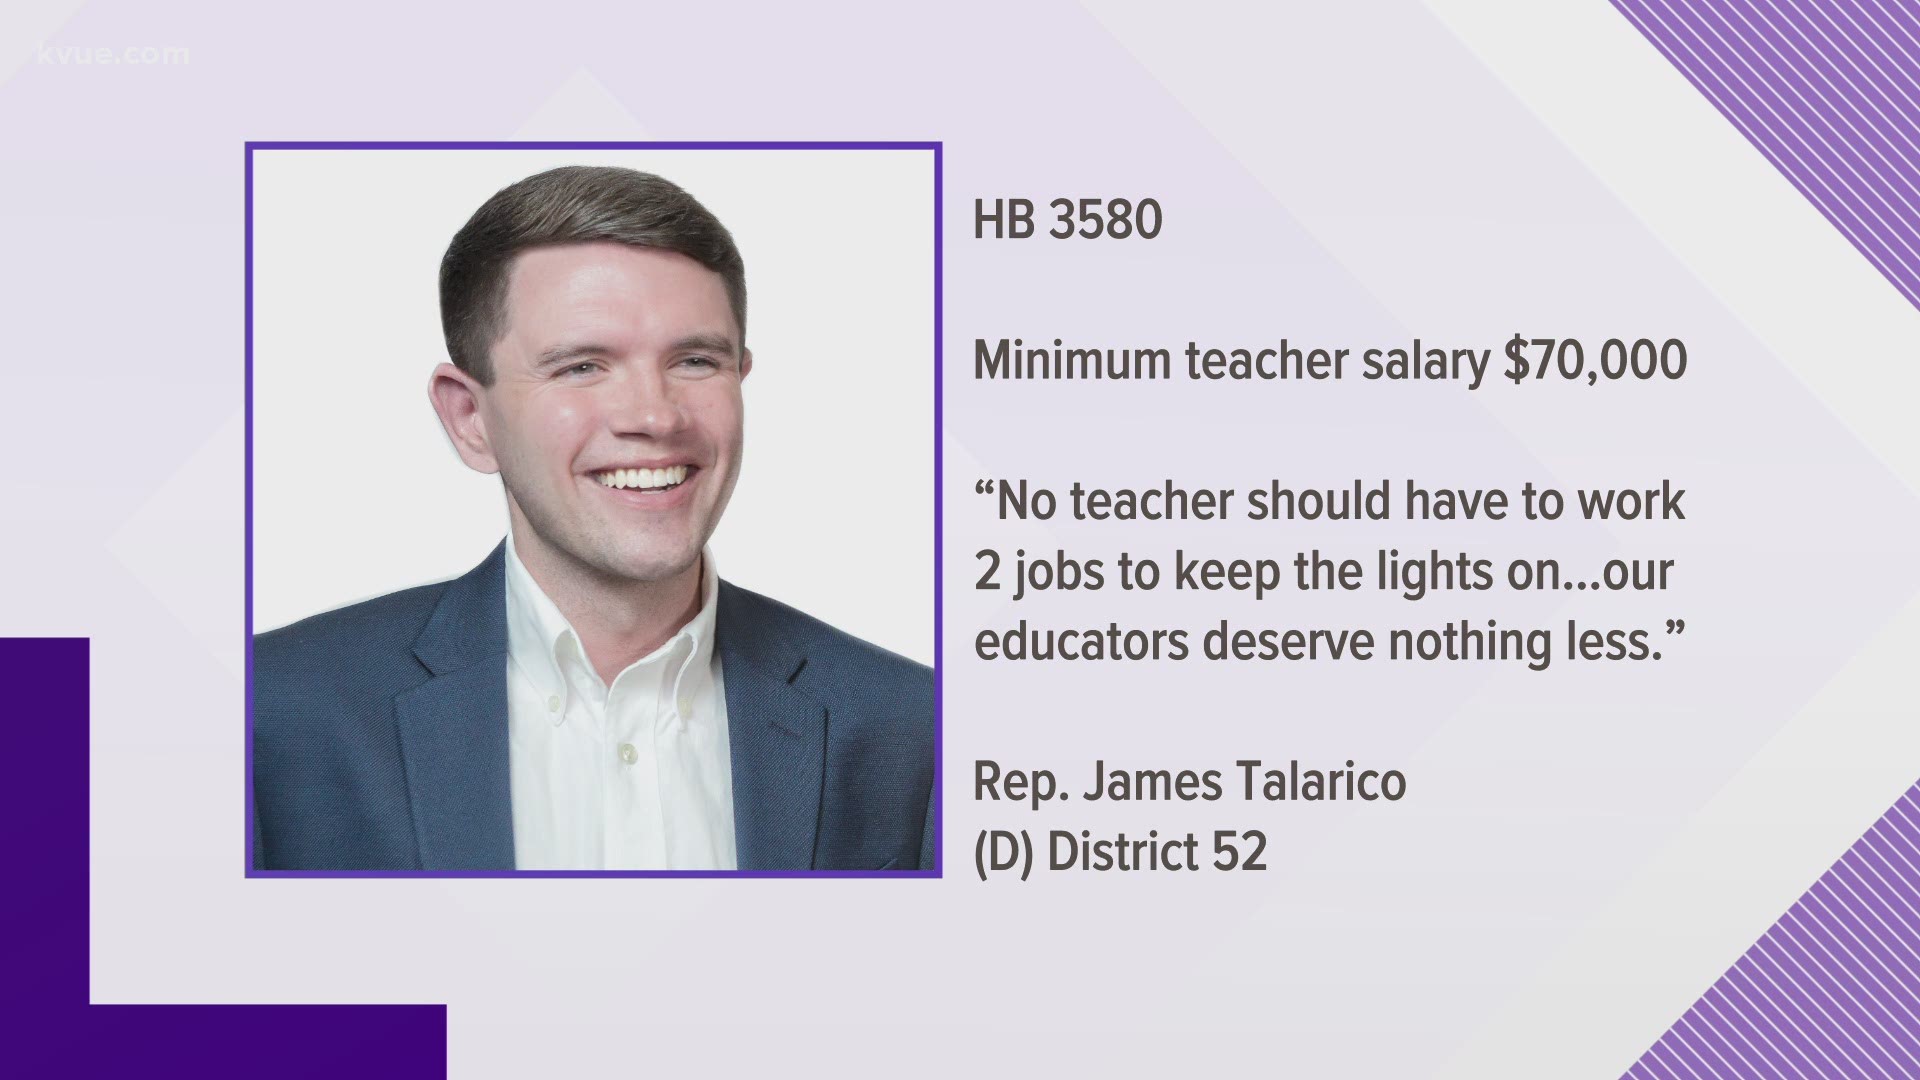 State Rep. James Talarico of Round Rock filed House Bill 3580 Monday. It sets a minimum teacher salary at $70,000 per year.